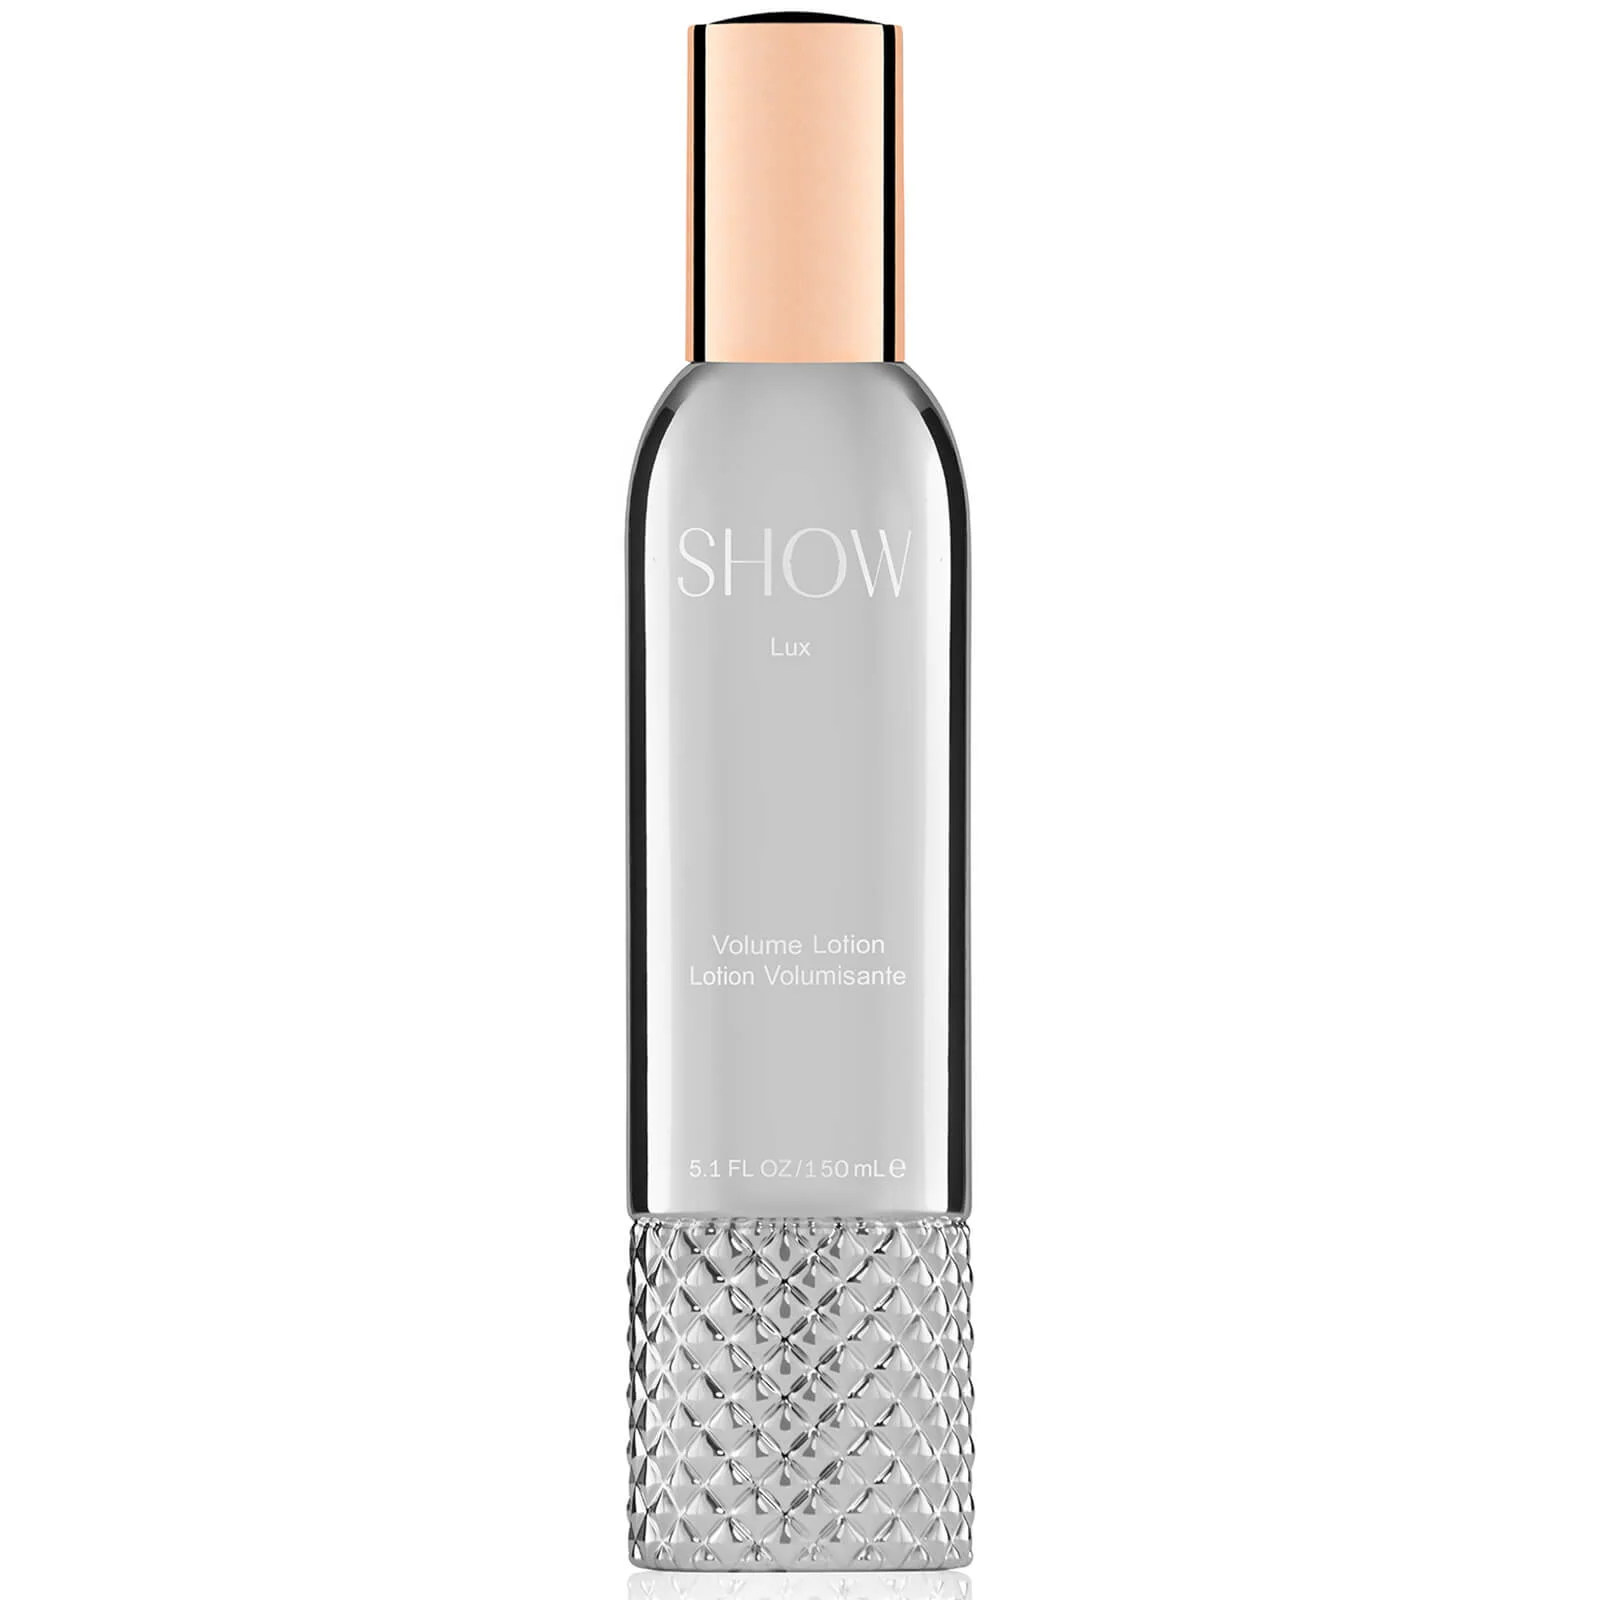 SHOW Beauty Lux Volume Lotion (150ml) Image 1